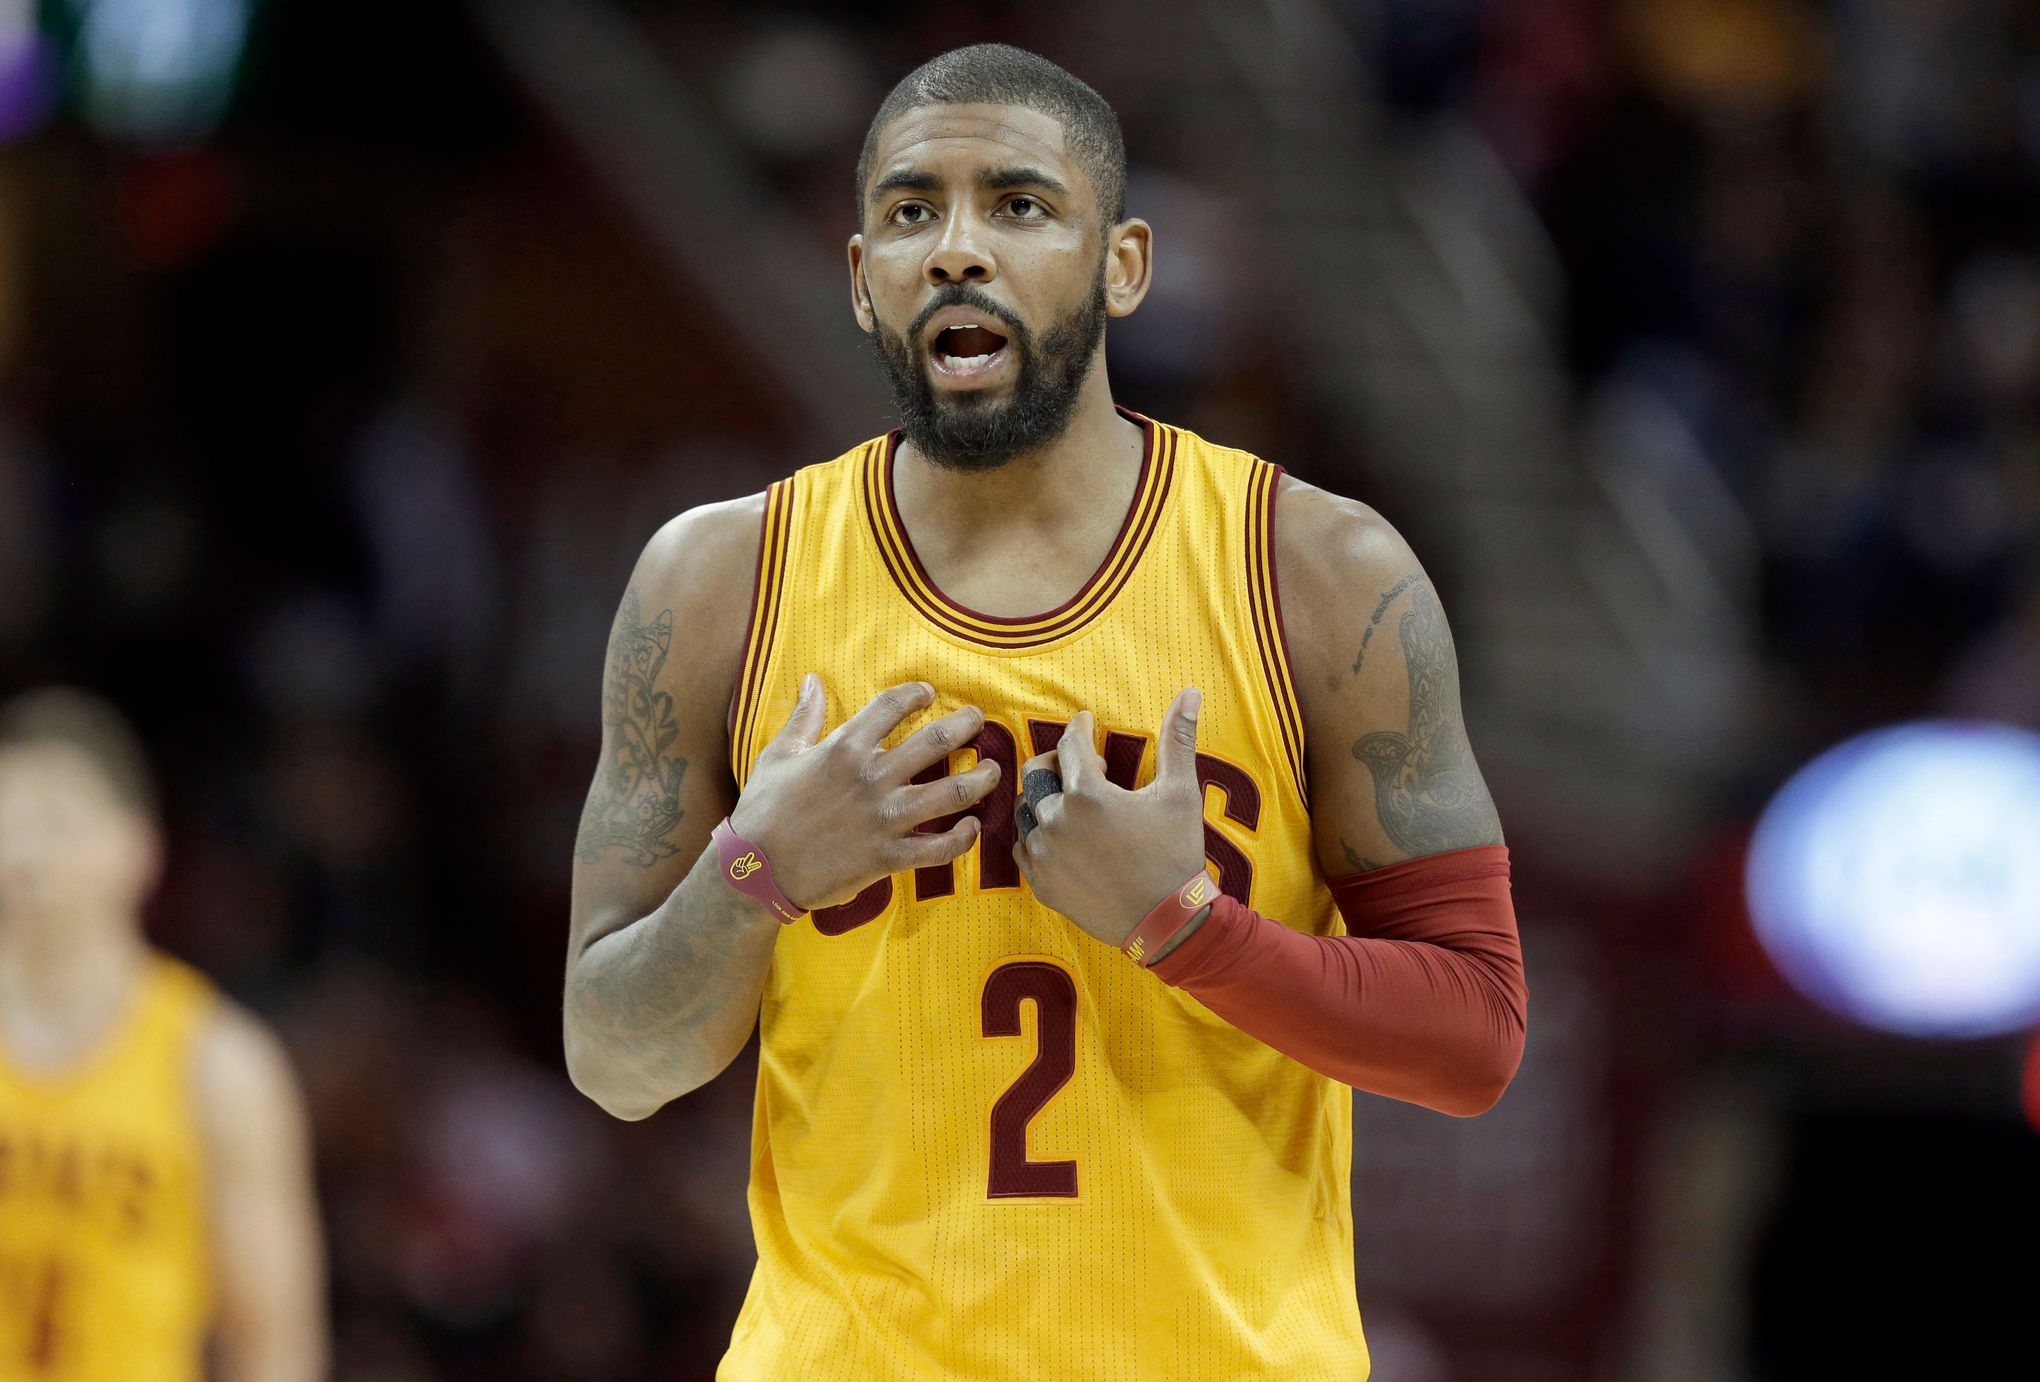 Kyrie Irving: Trade request was about his potential, not James